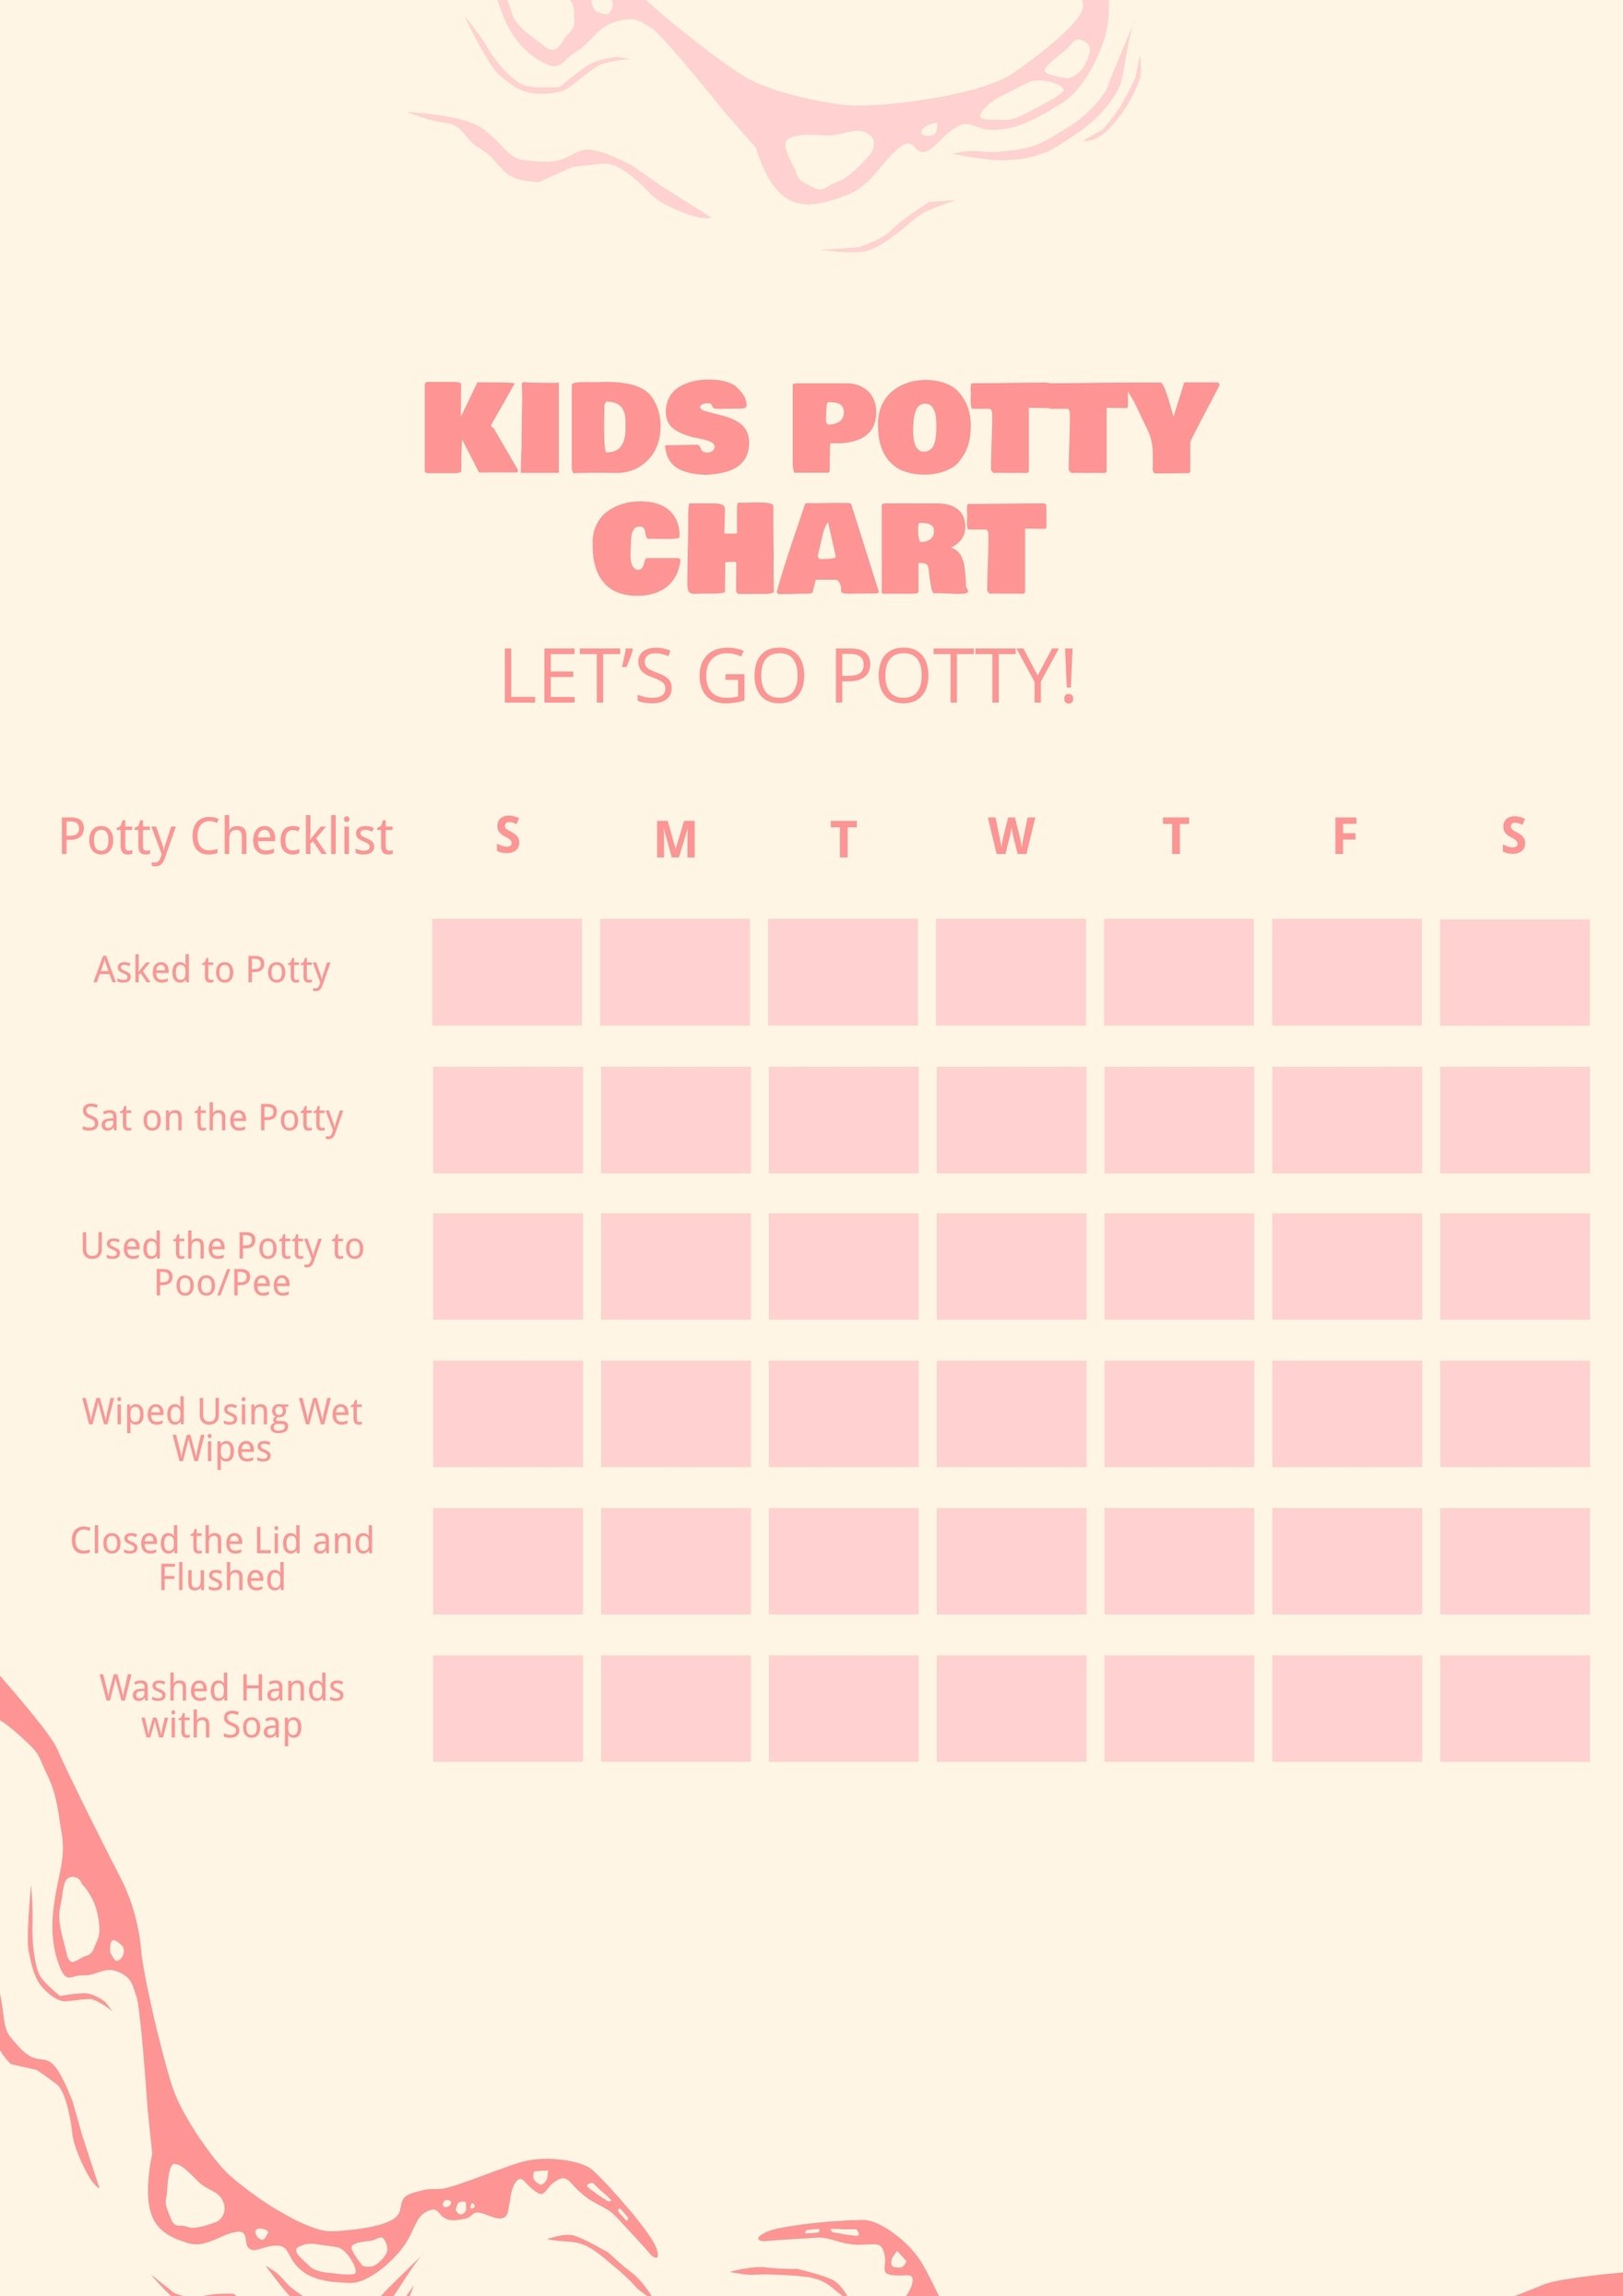 FREE Potty Chart Template Download in PDF, Illustrator